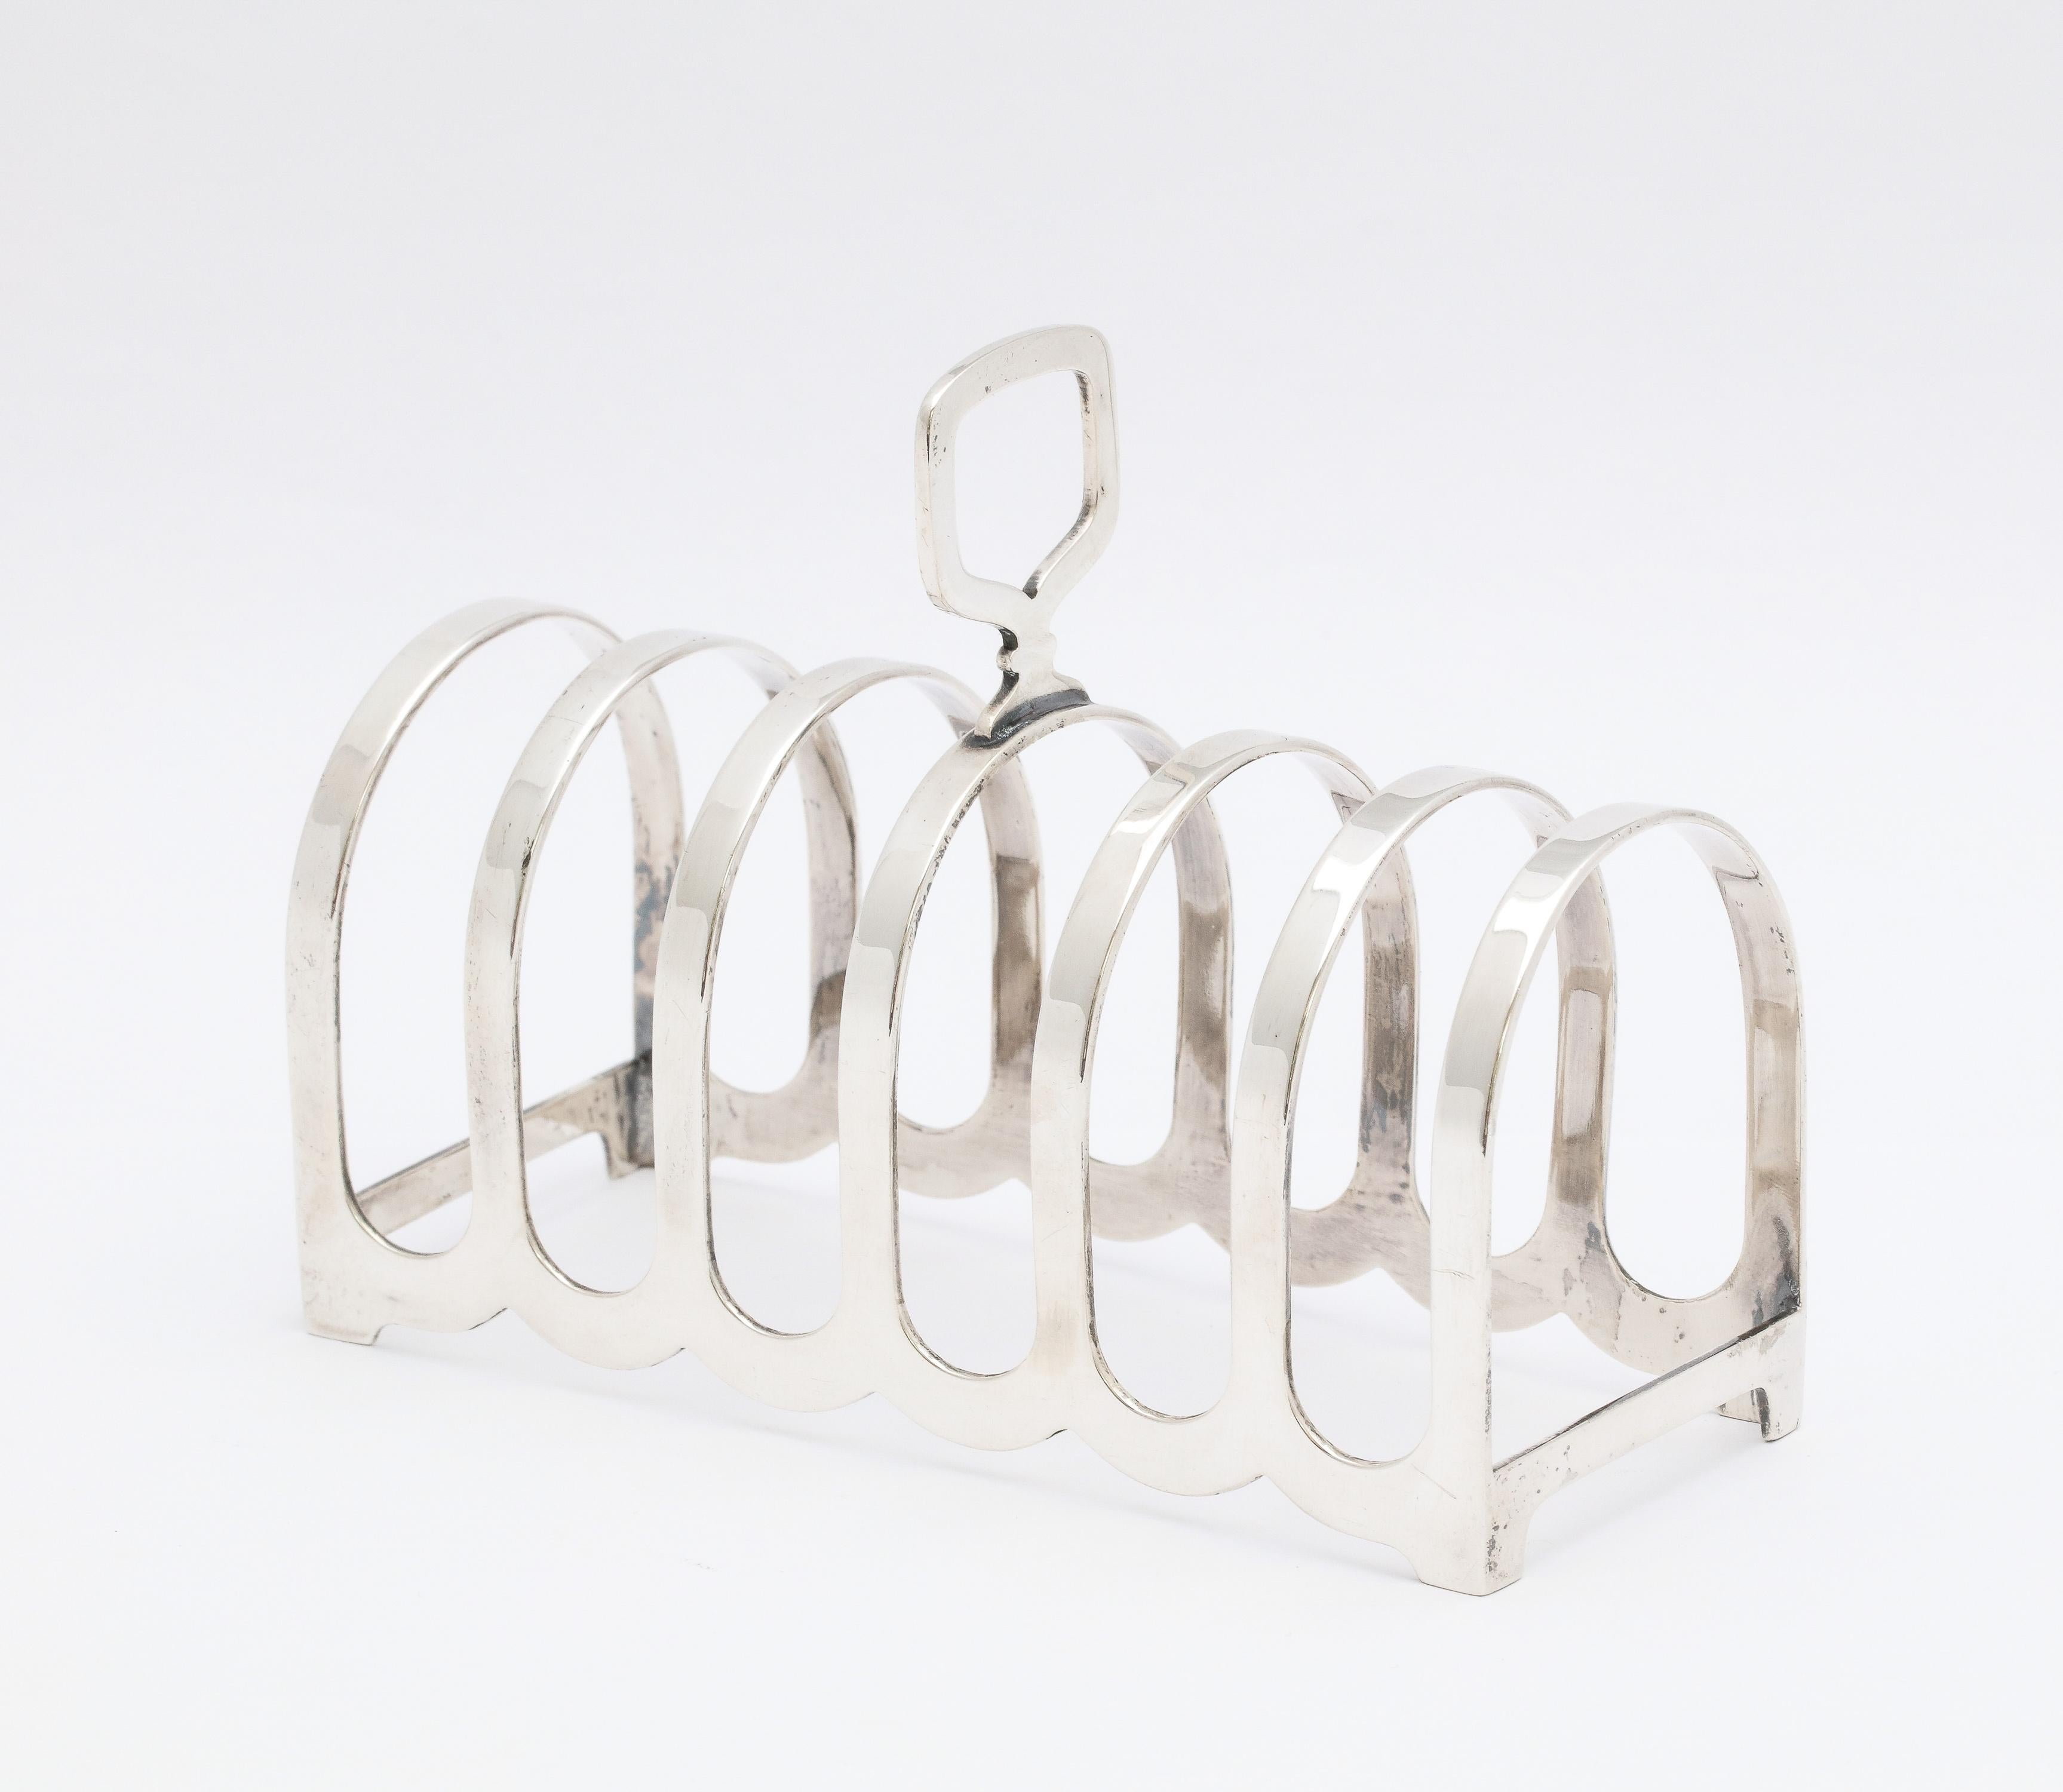 Edwardian Style, sterling silver toast rack, Birmingham, England, year-hallmarked for 1959, Suckling, Ltd. - makers. Measures 4 1/2 inches long x 3 1/2 inches high (to top of finial) x 2 inches deep. Will hold 6 slices of toast. Weighs 2.485 troy